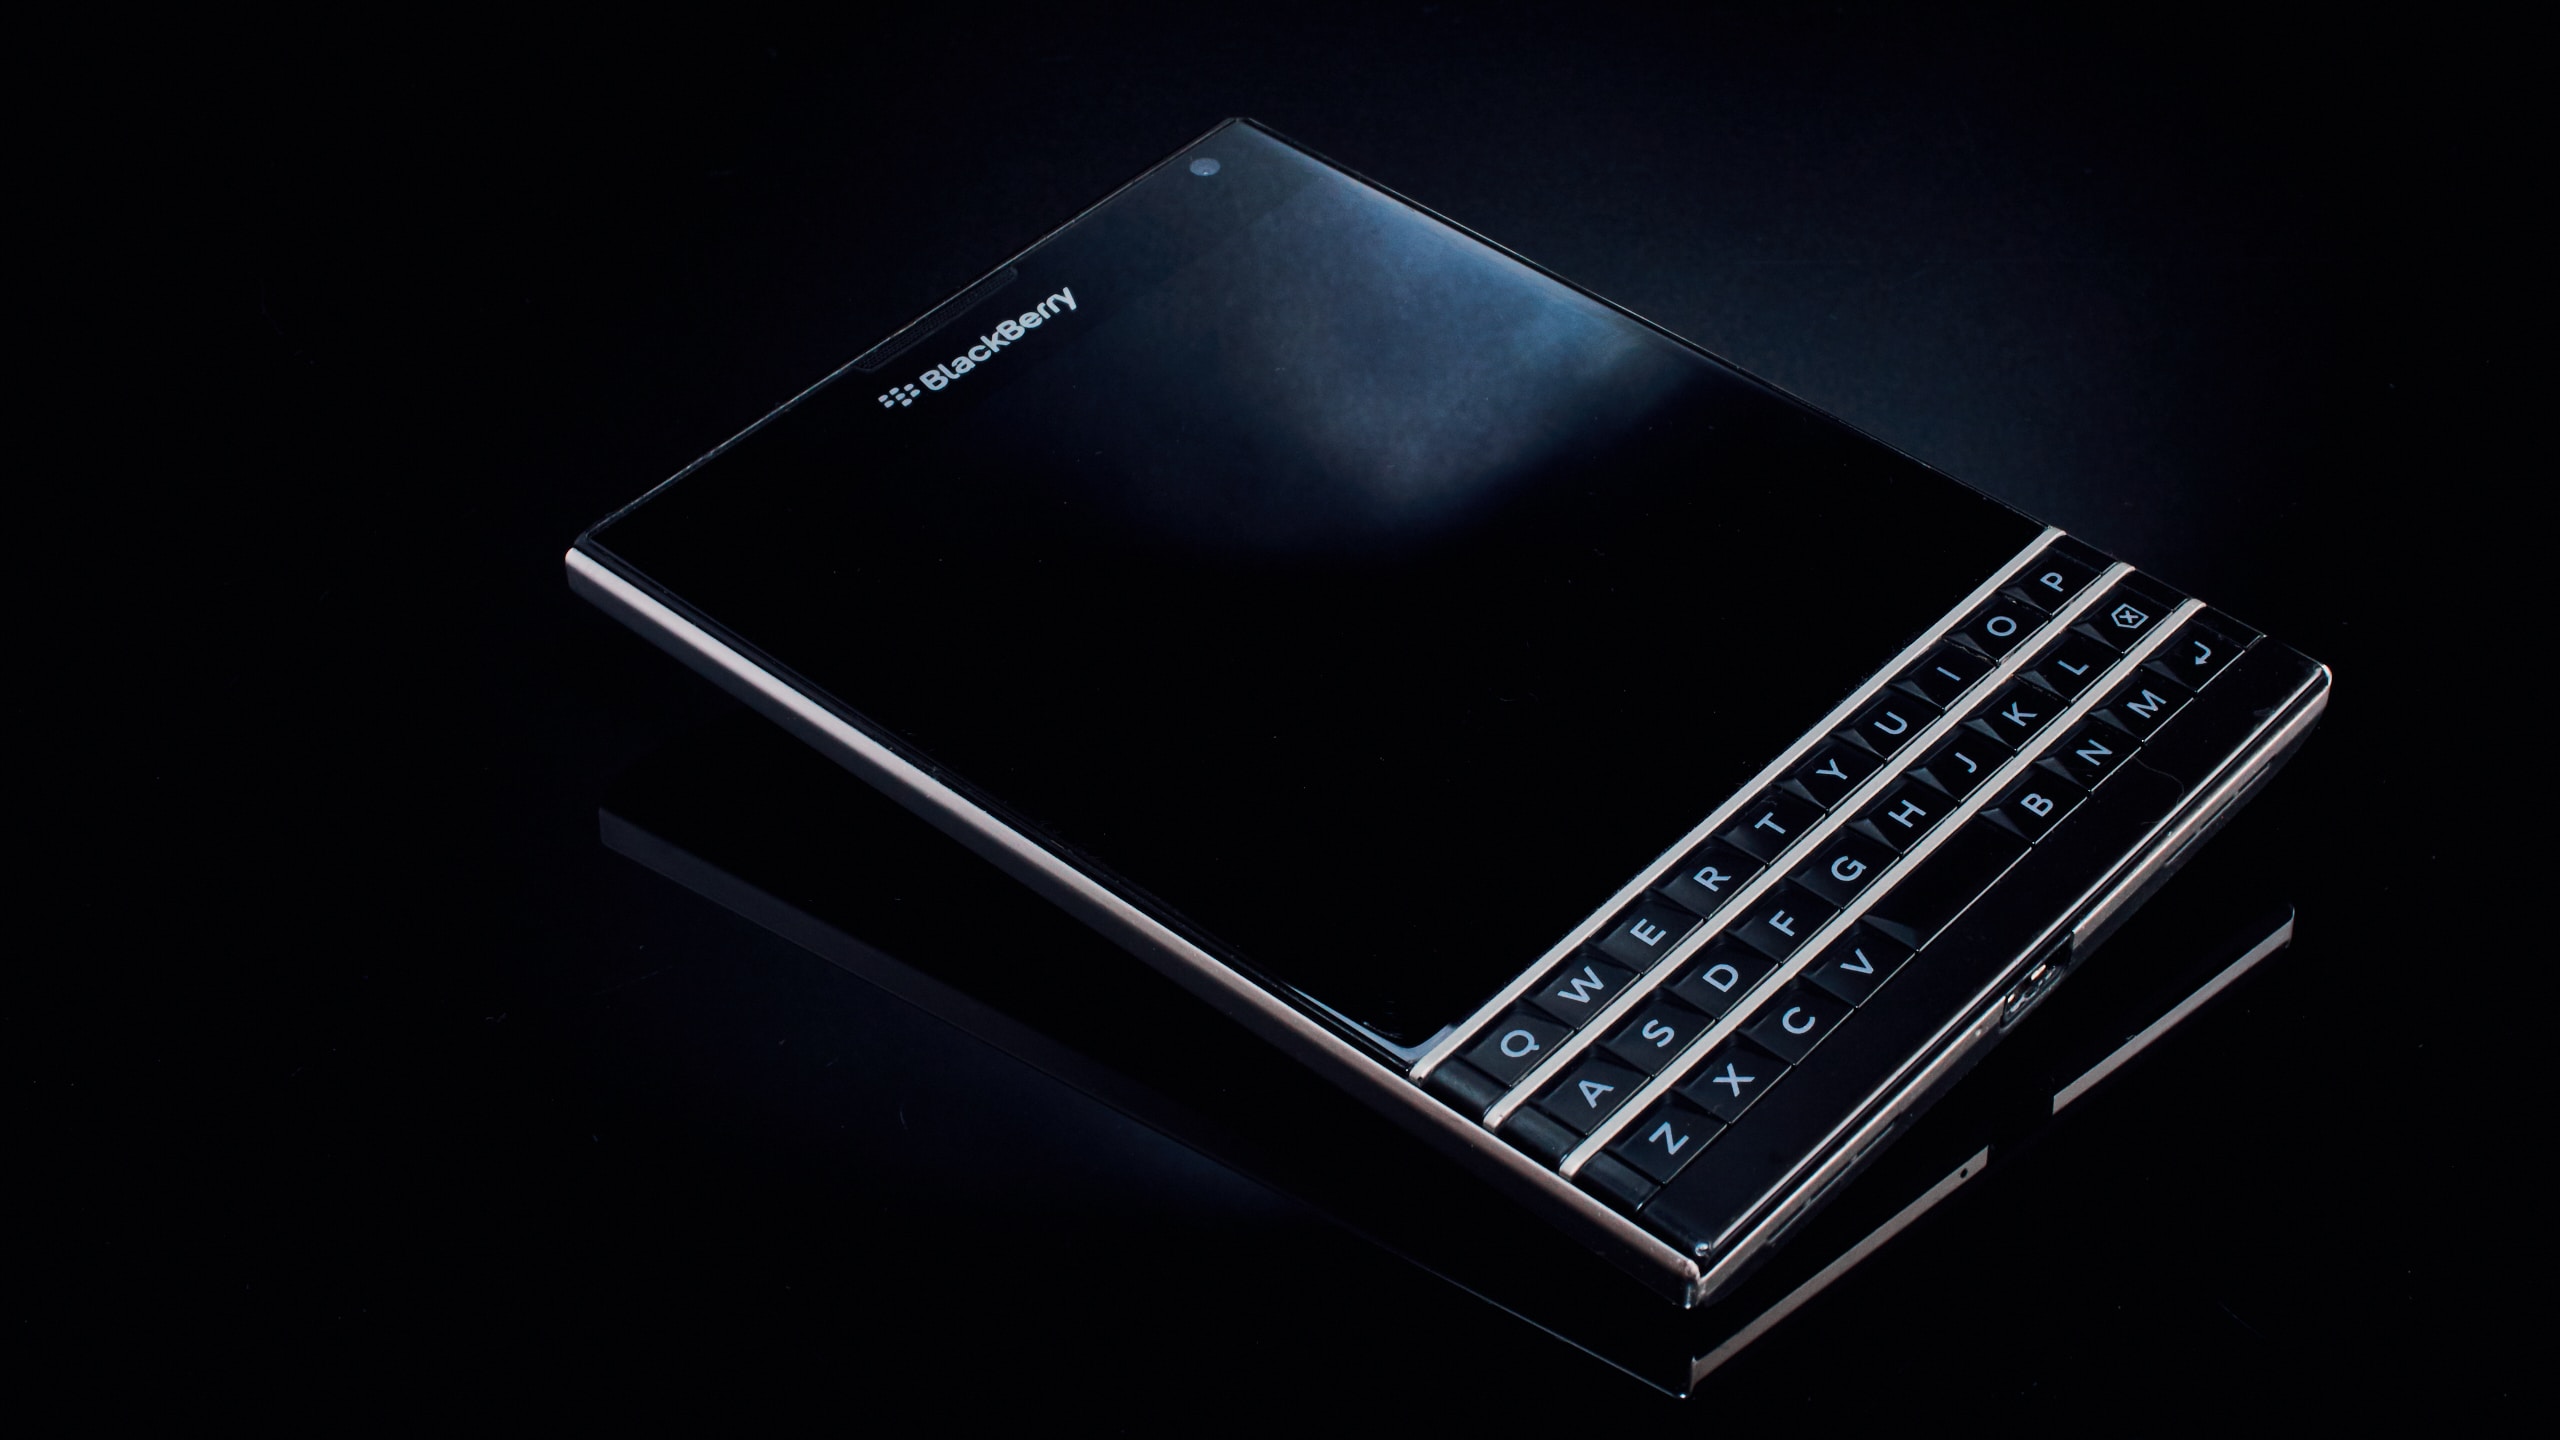 Reasons Why Blackberry Smartphone Stopped Pleasing Your Eyes